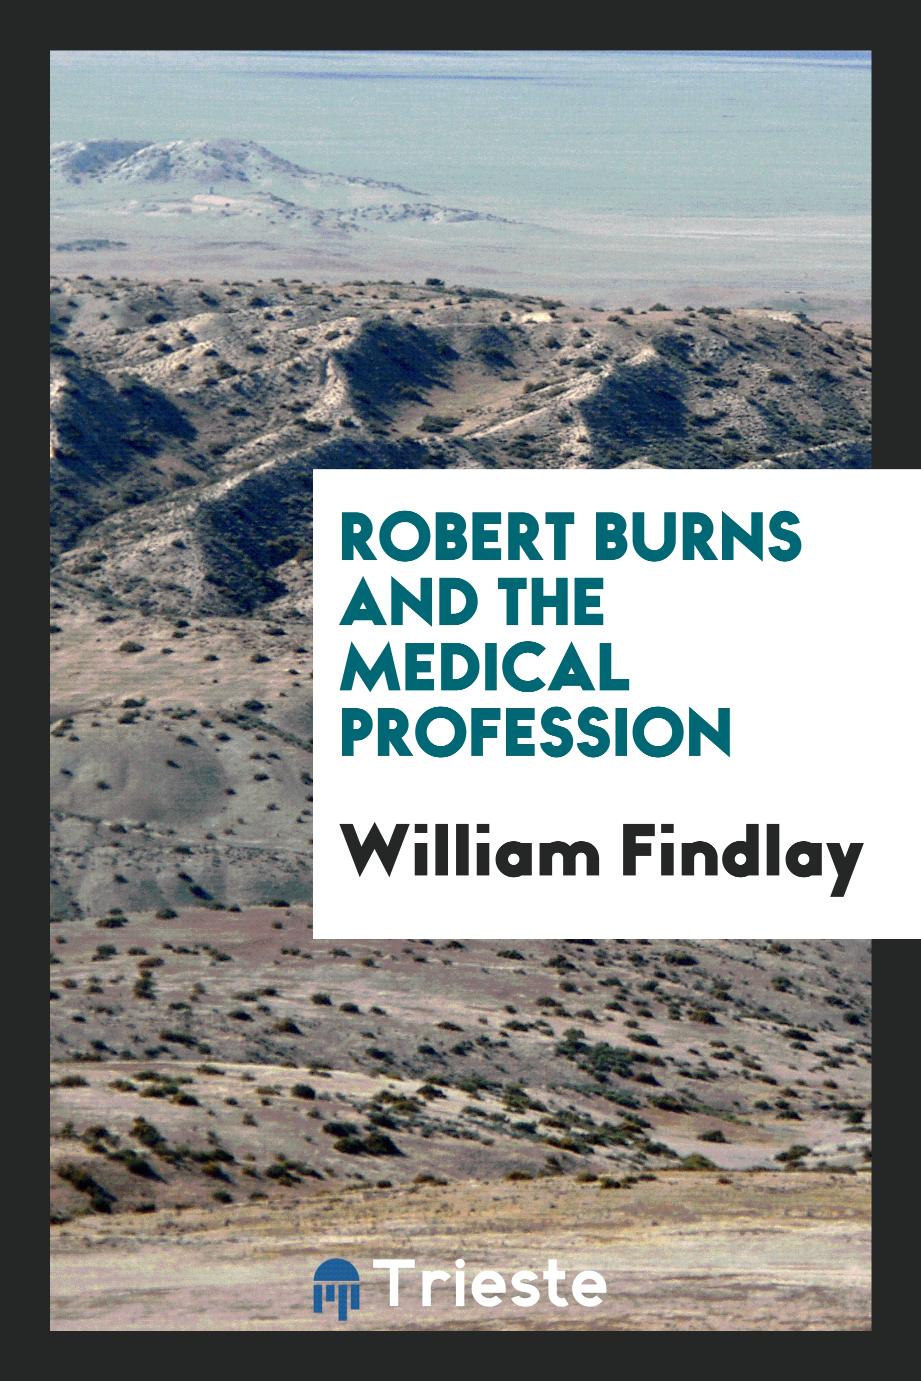 Robert Burns and the medical profession